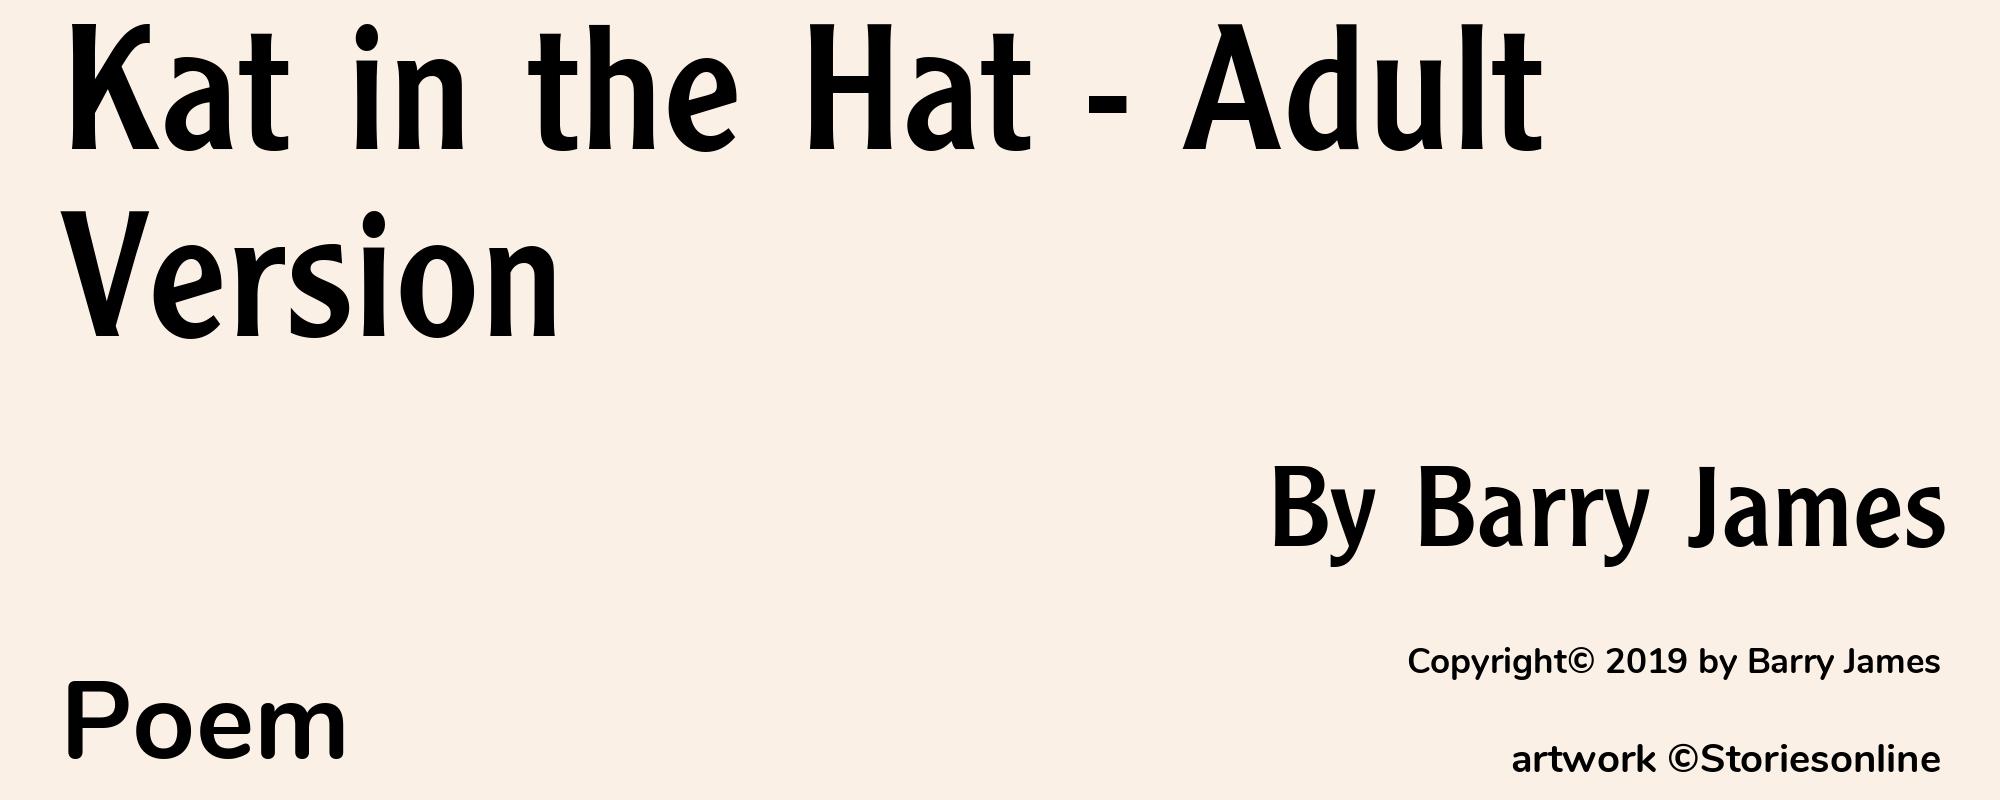 Kat in the Hat - Adult Version - Cover